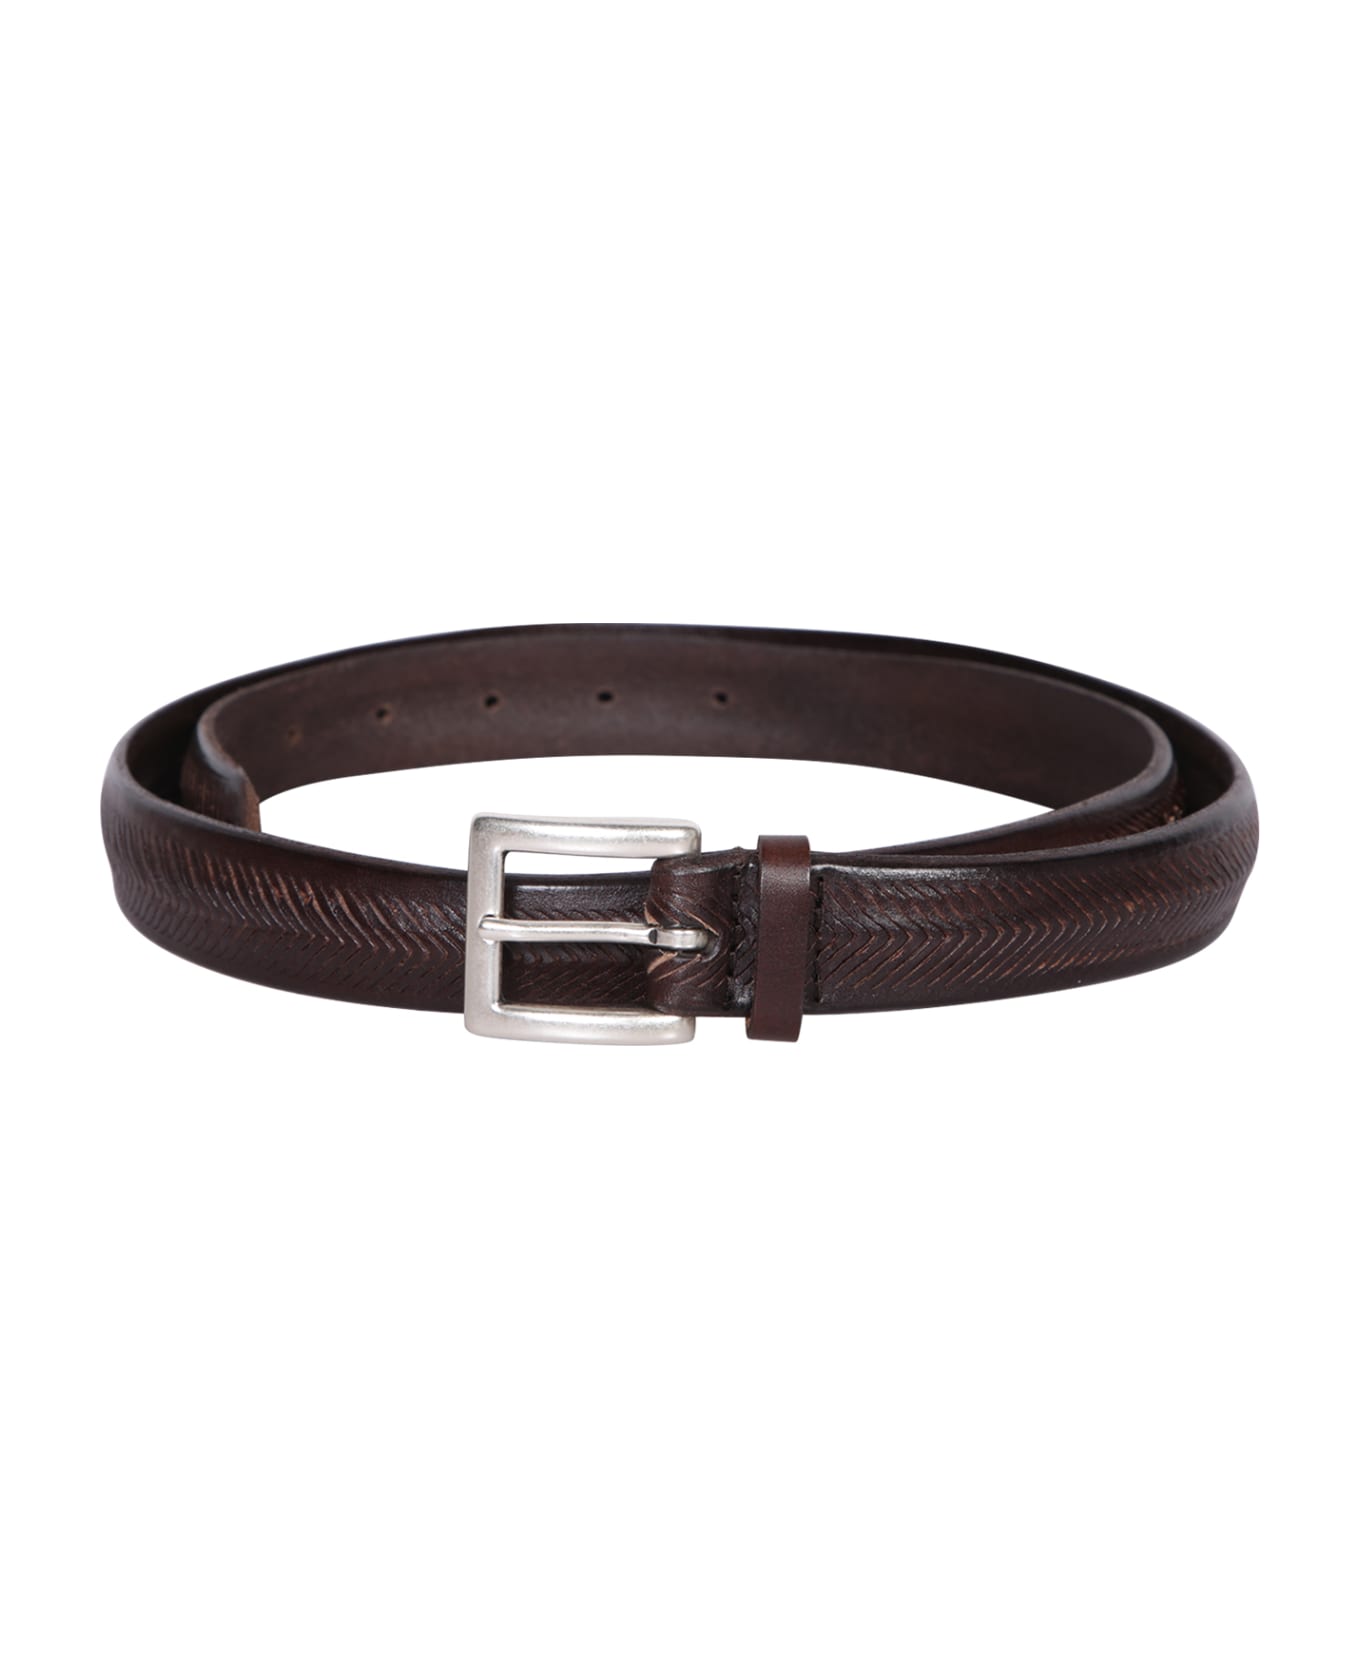 Orciani Triangular Engraved Brown Belt - Brown